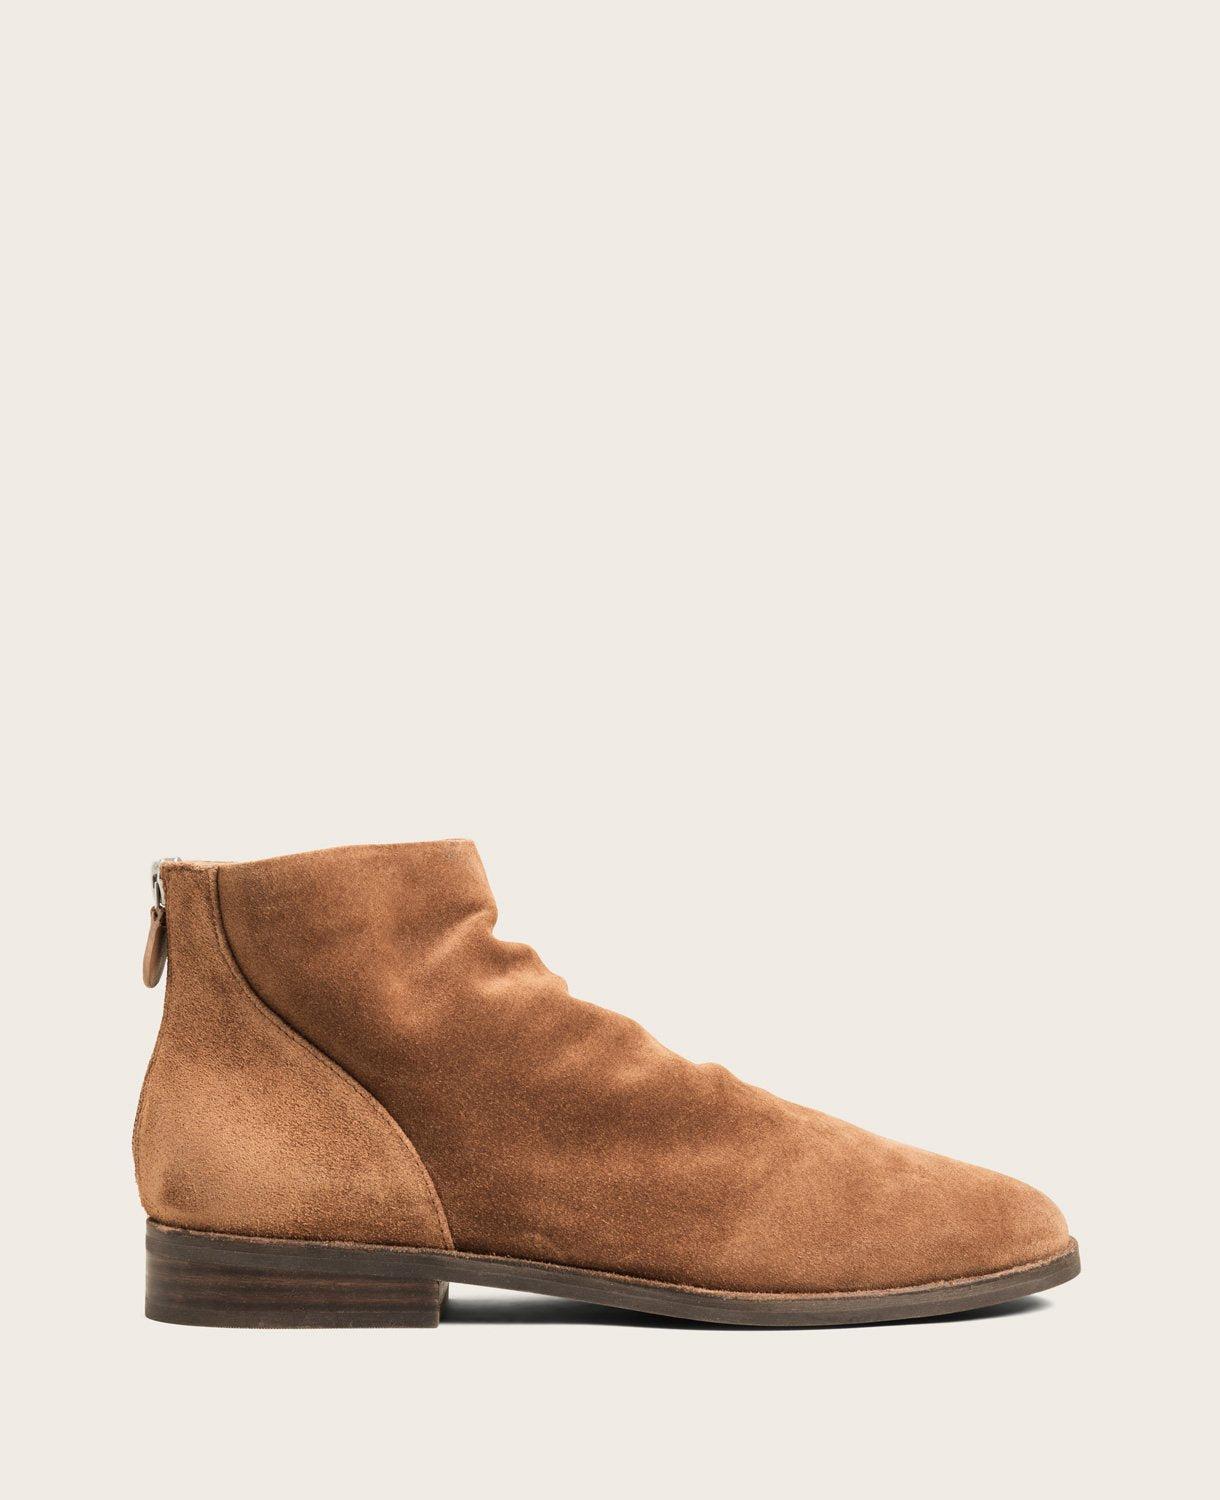 GENTLE SOULS BY KENNETH COLE Emma Bootie Product Image